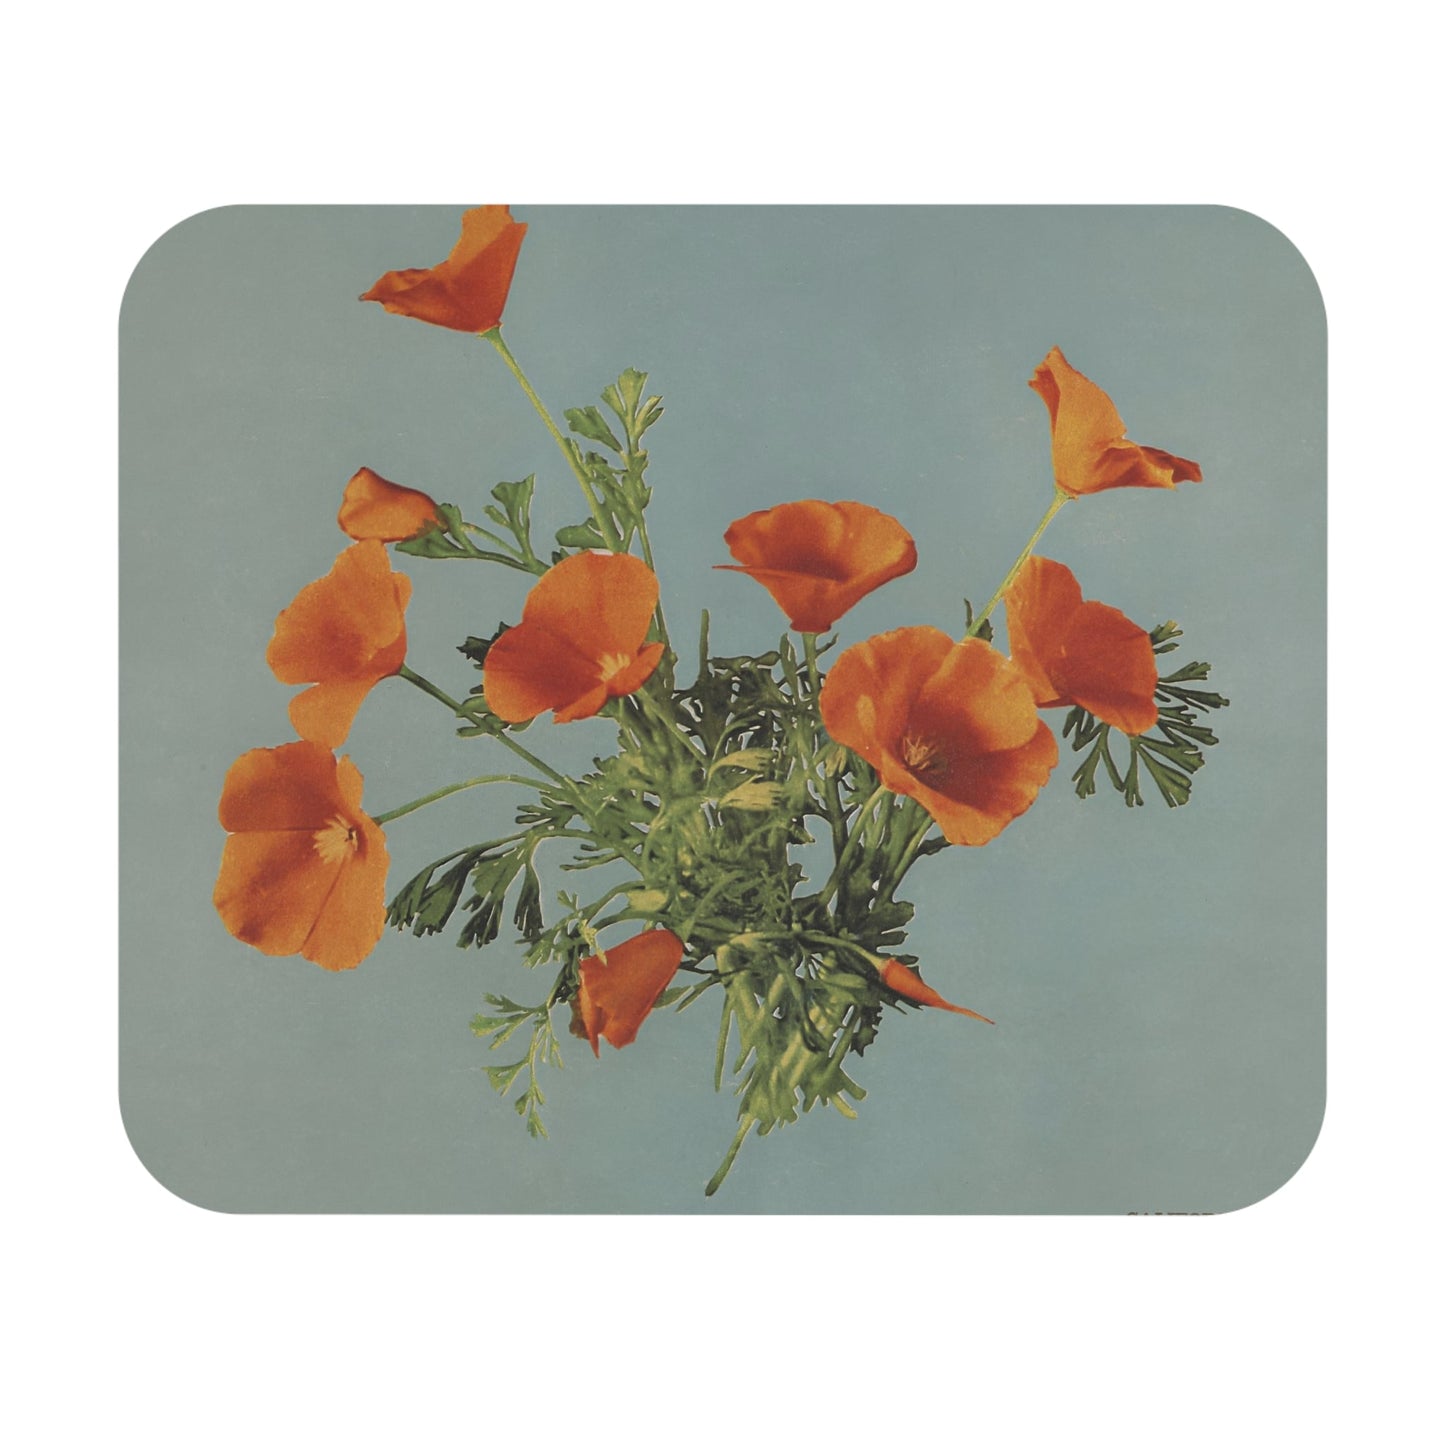 Vintage Floral Mouse Pad with poppy flowers design, desk and office decor showcasing vibrant poppy flower artwork.